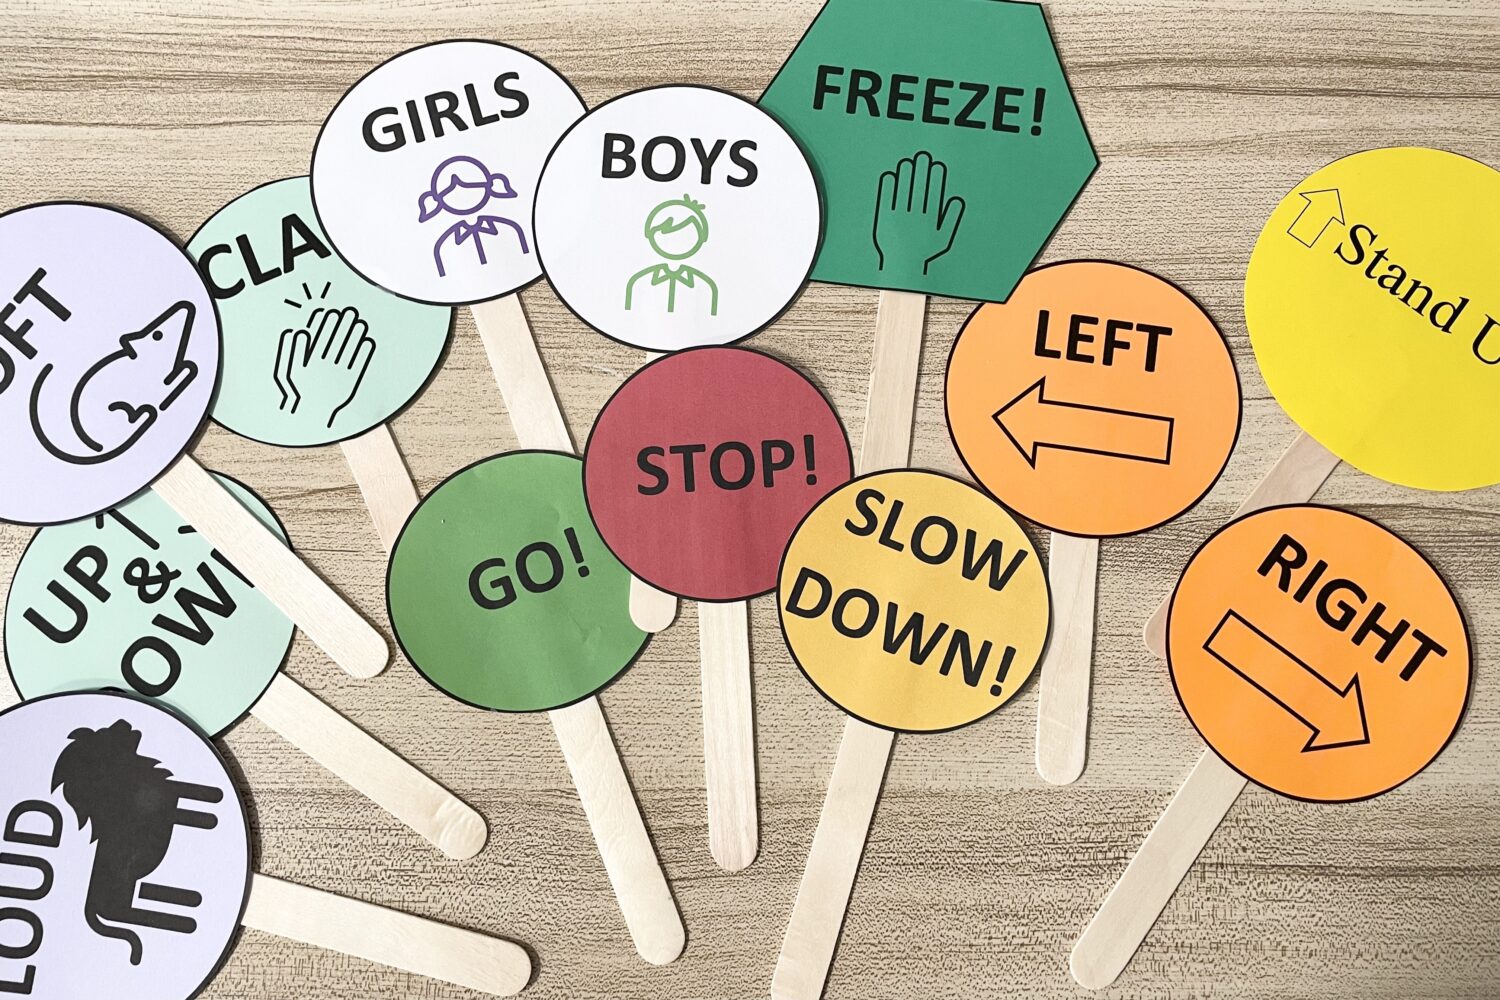 Use these Primary Cue Cards to add some fun to any singing time activity with simple popsicle stick signs to add movement and variety while you review!